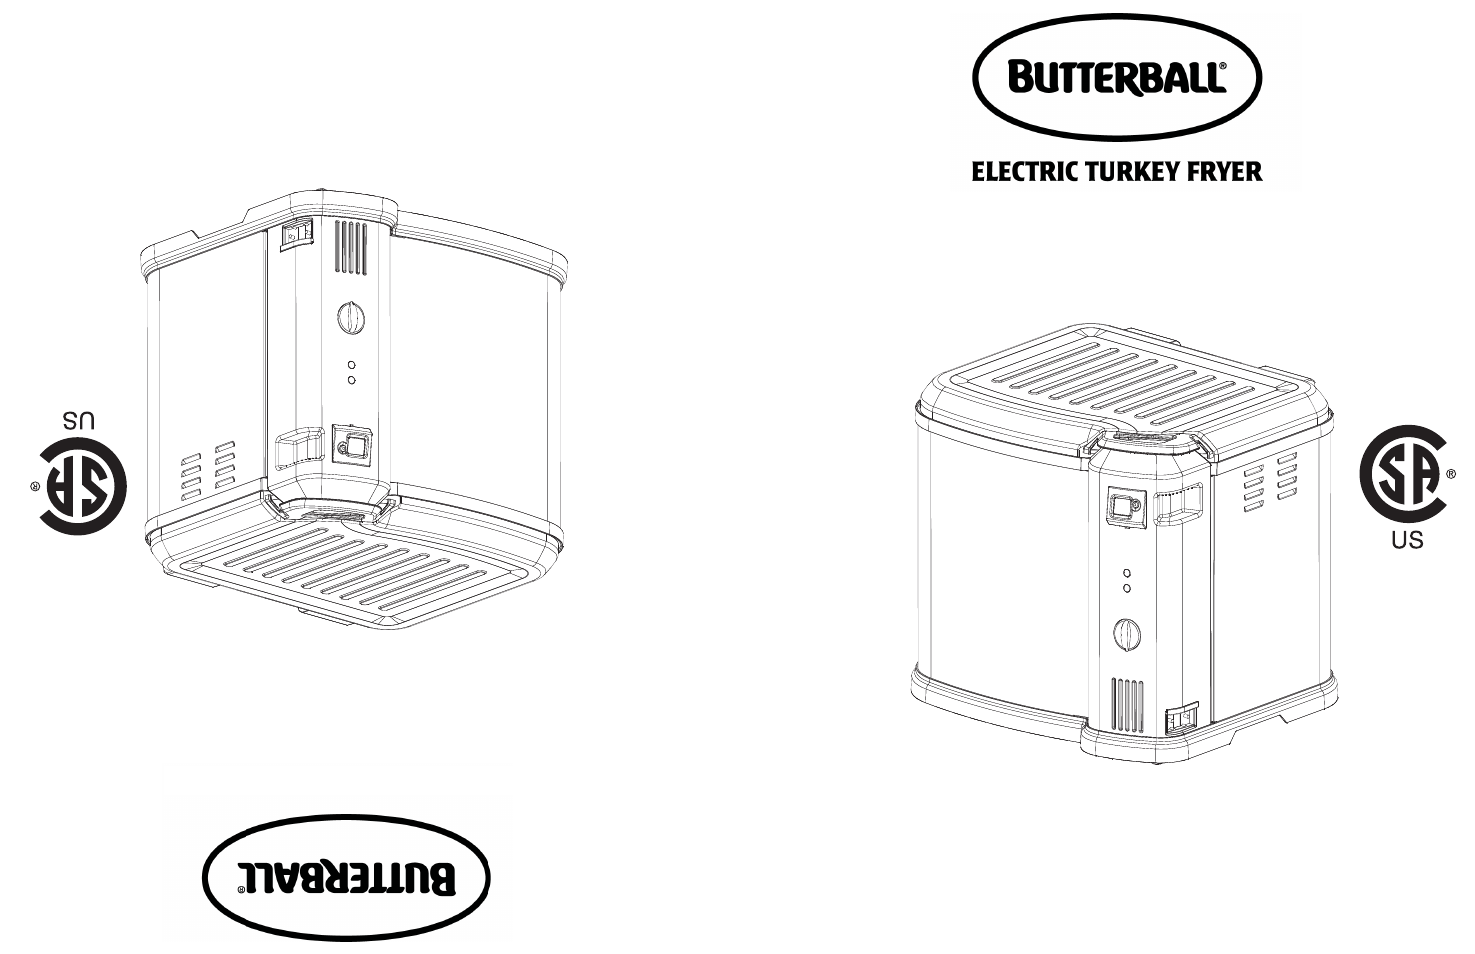 Masterbuilt Butterball XL Indoor Electric Turkey Fryer (23011114) User Manual | 16 pages